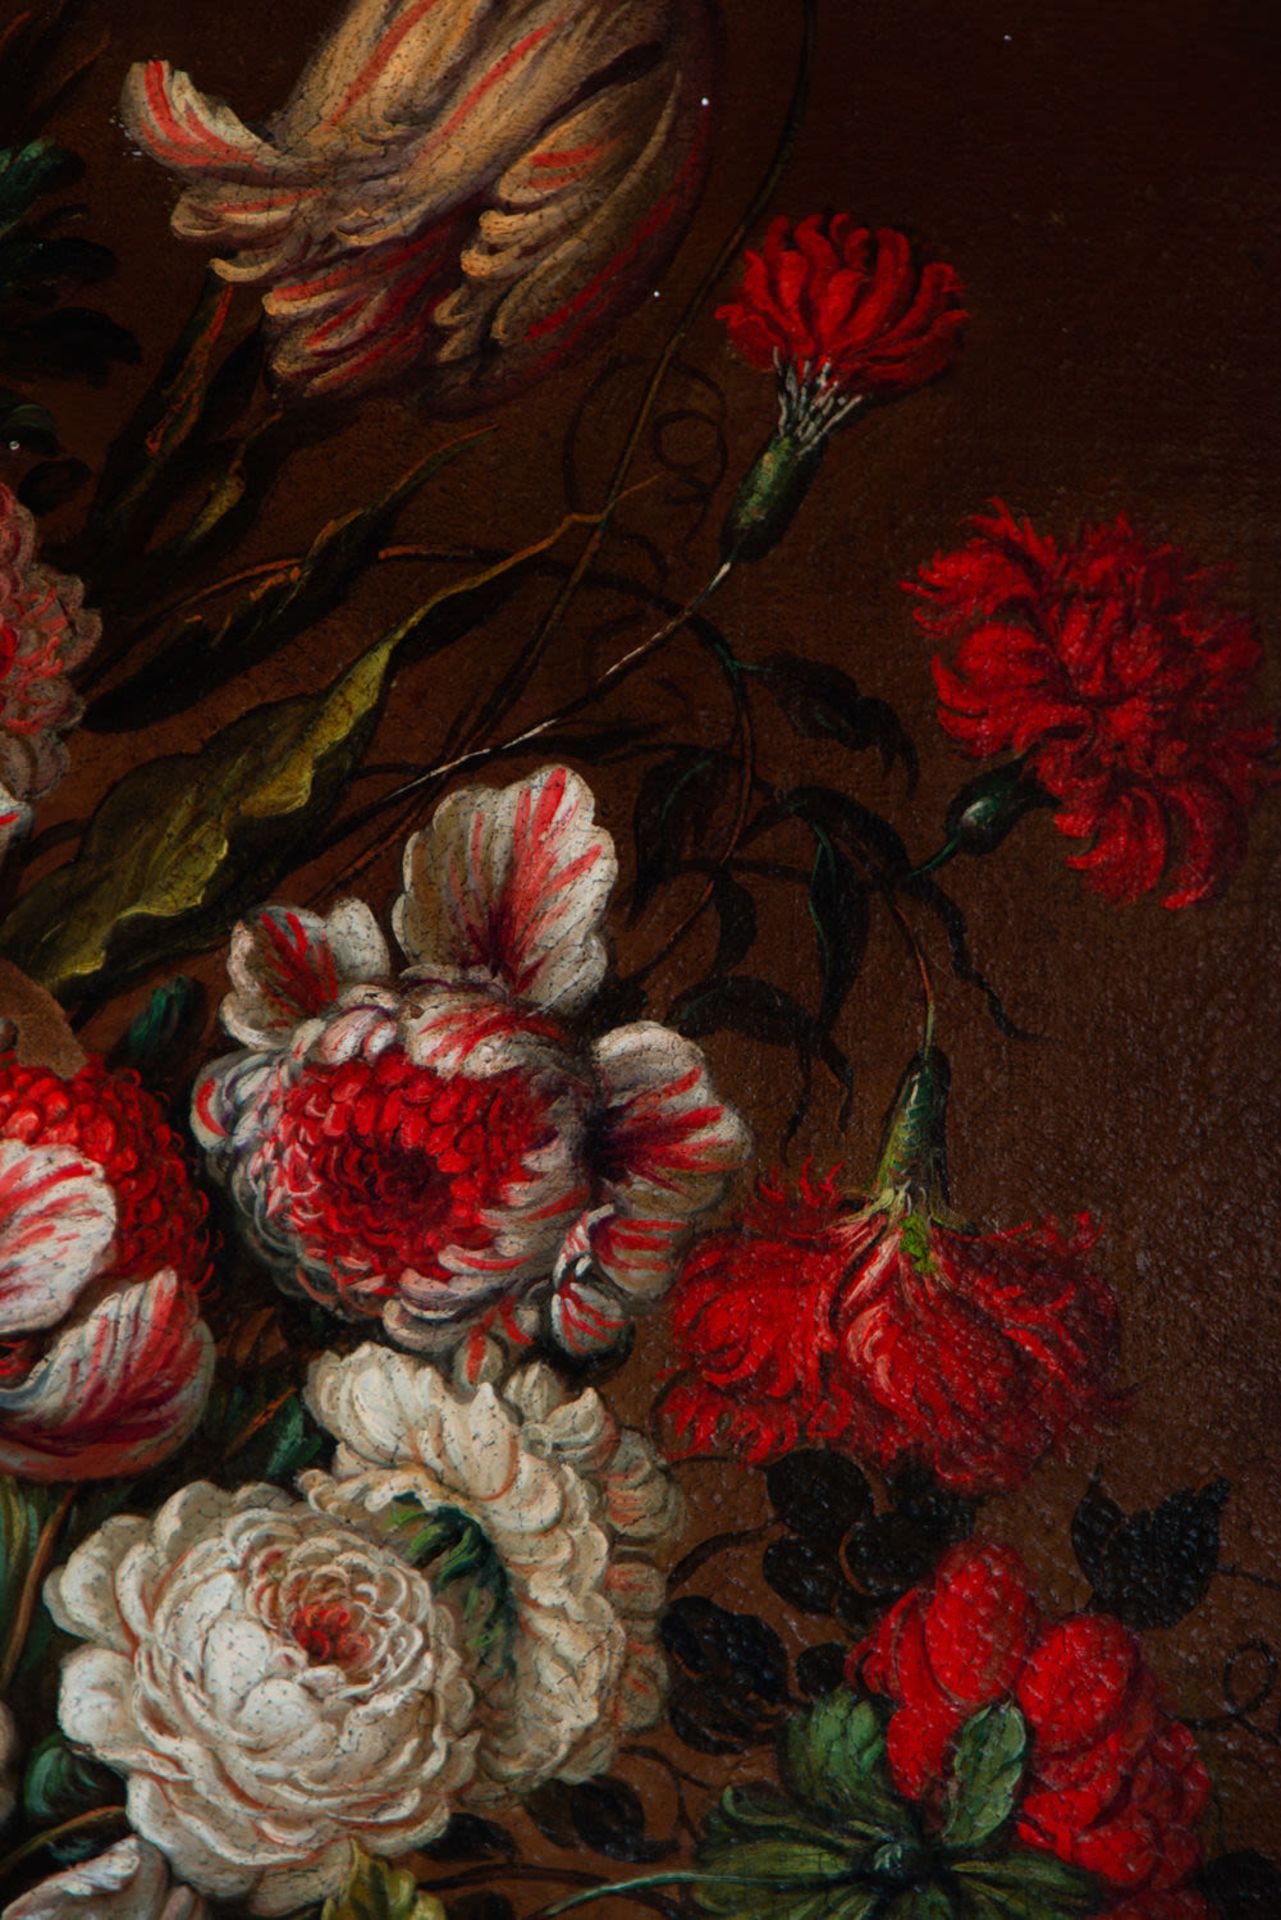 Pair of large still lifes of Flowers, Dutch school of the 17th - 18th century - Image 5 of 20